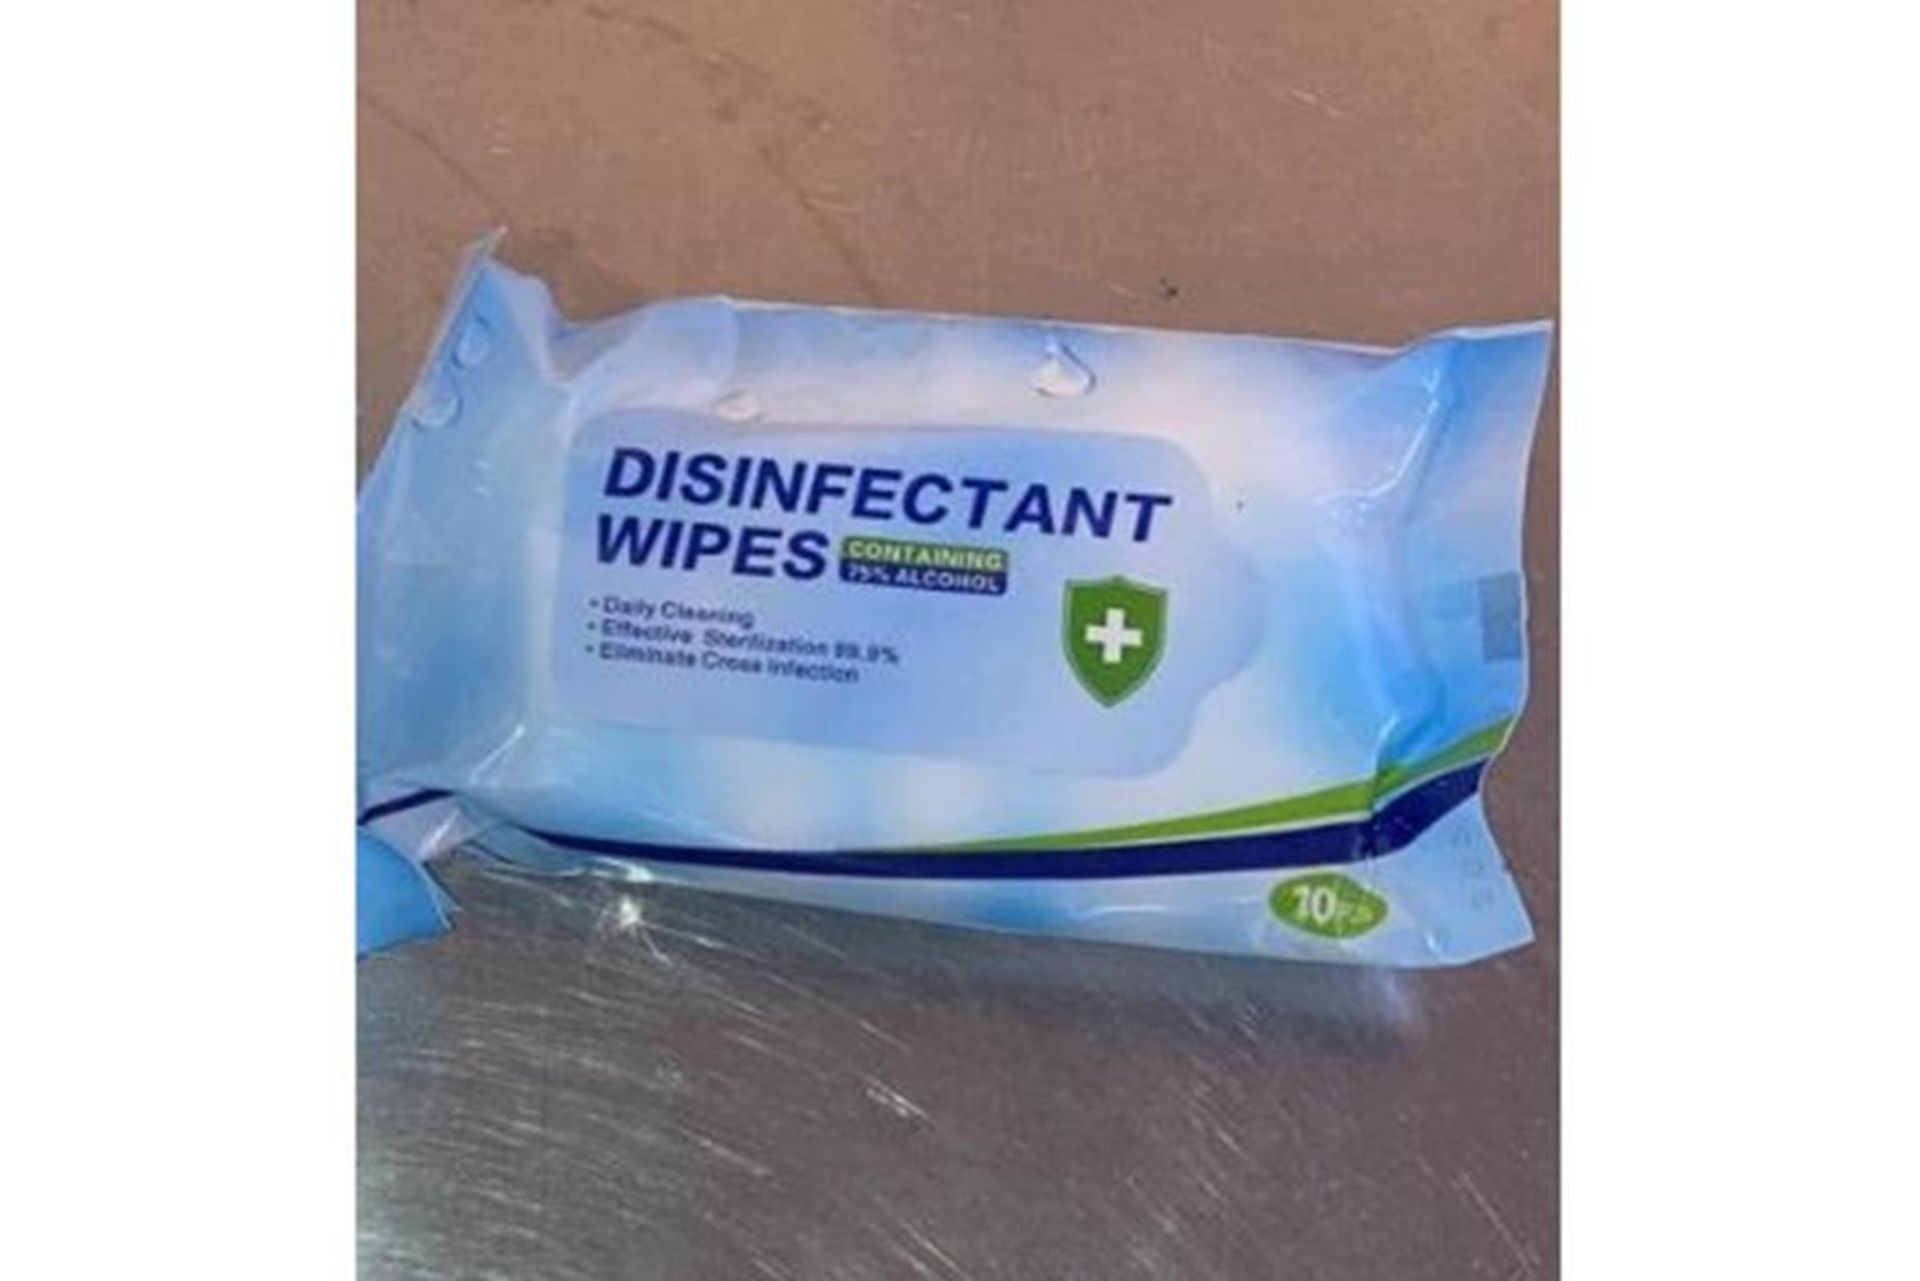 2500 Antibacterial Disinfectant Wipes (75% alcohol) - Image 3 of 4